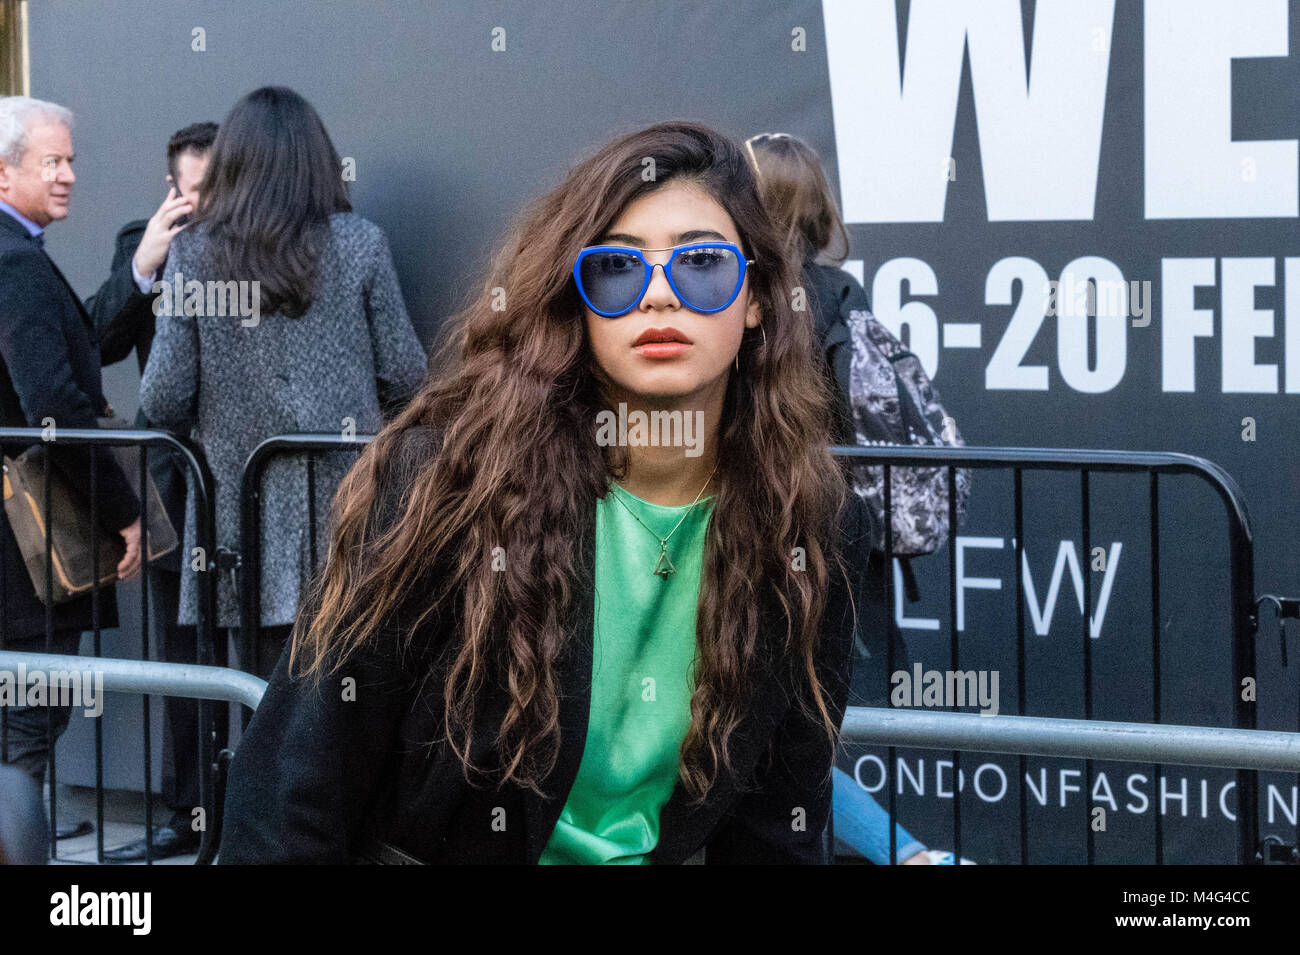 London 16th February 2018, Fashionistas outside the London Fashion Week venues; they are fashion followers or young designers trying to publiscies their designs. Credit: Ian Davidson/Alamy Live News Stock Photo